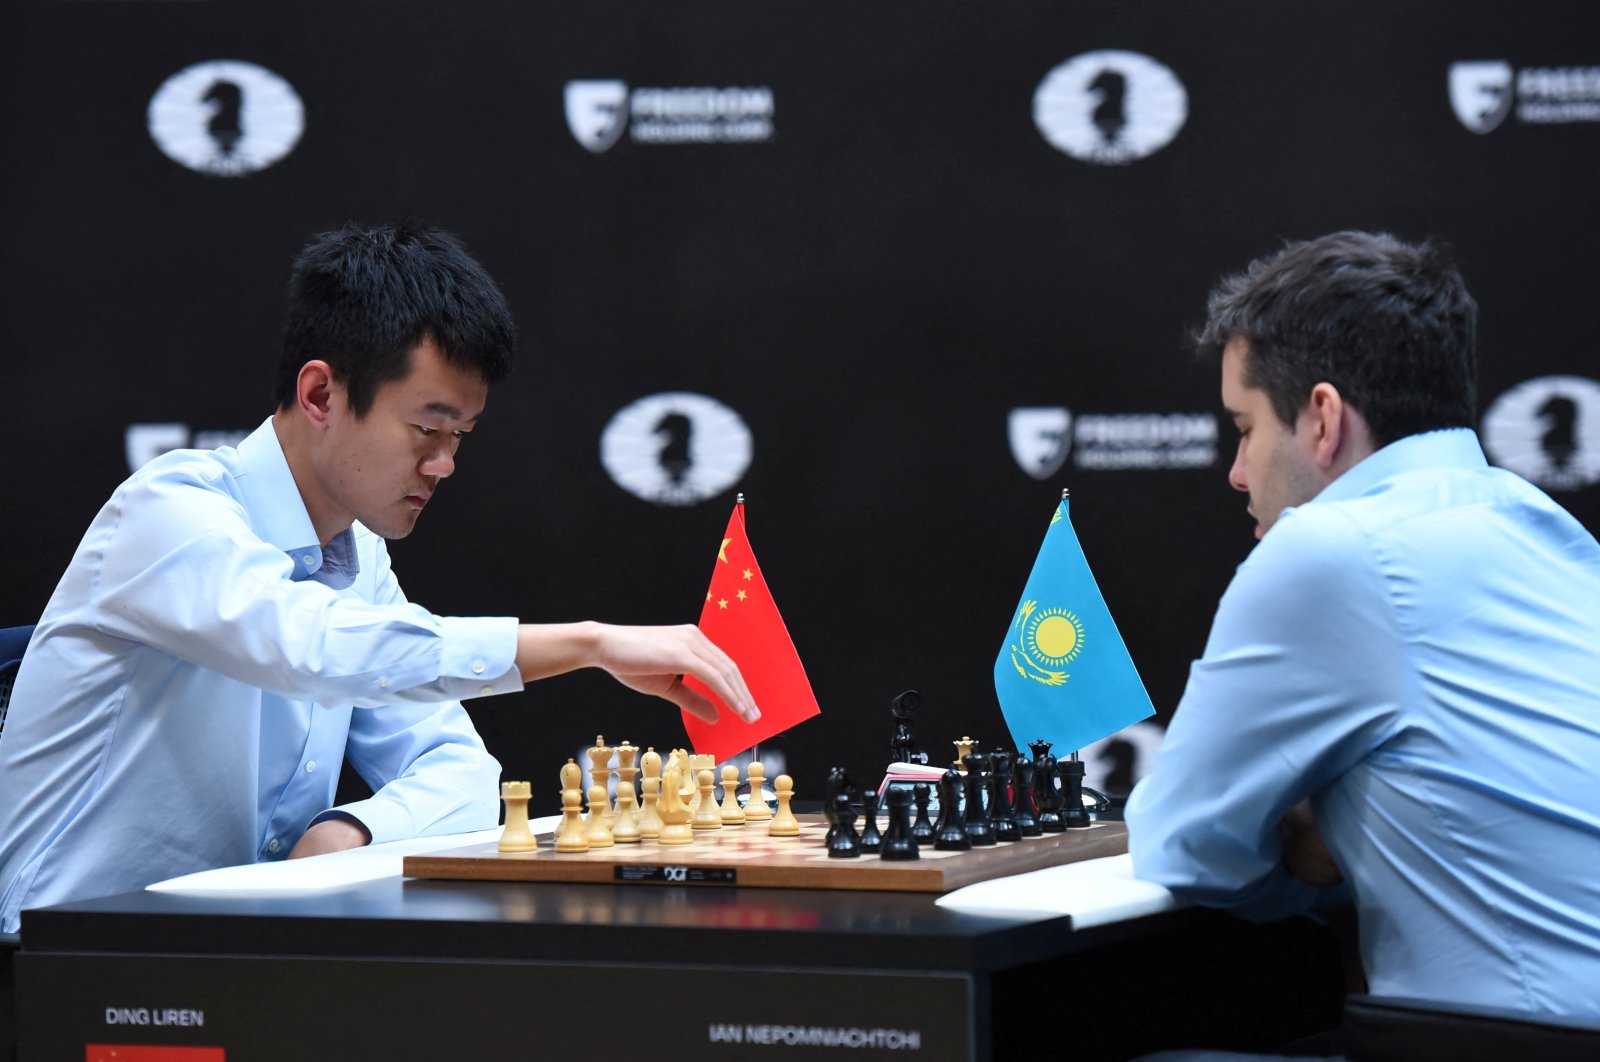 China&#039;s Ding Liren competes against Russia&#039;s Ian Nepomniachtchi during the FIDE World Championship tie-breaker match, Astana, Kazakhstan, April 30, 2023. (Reuters Photo)